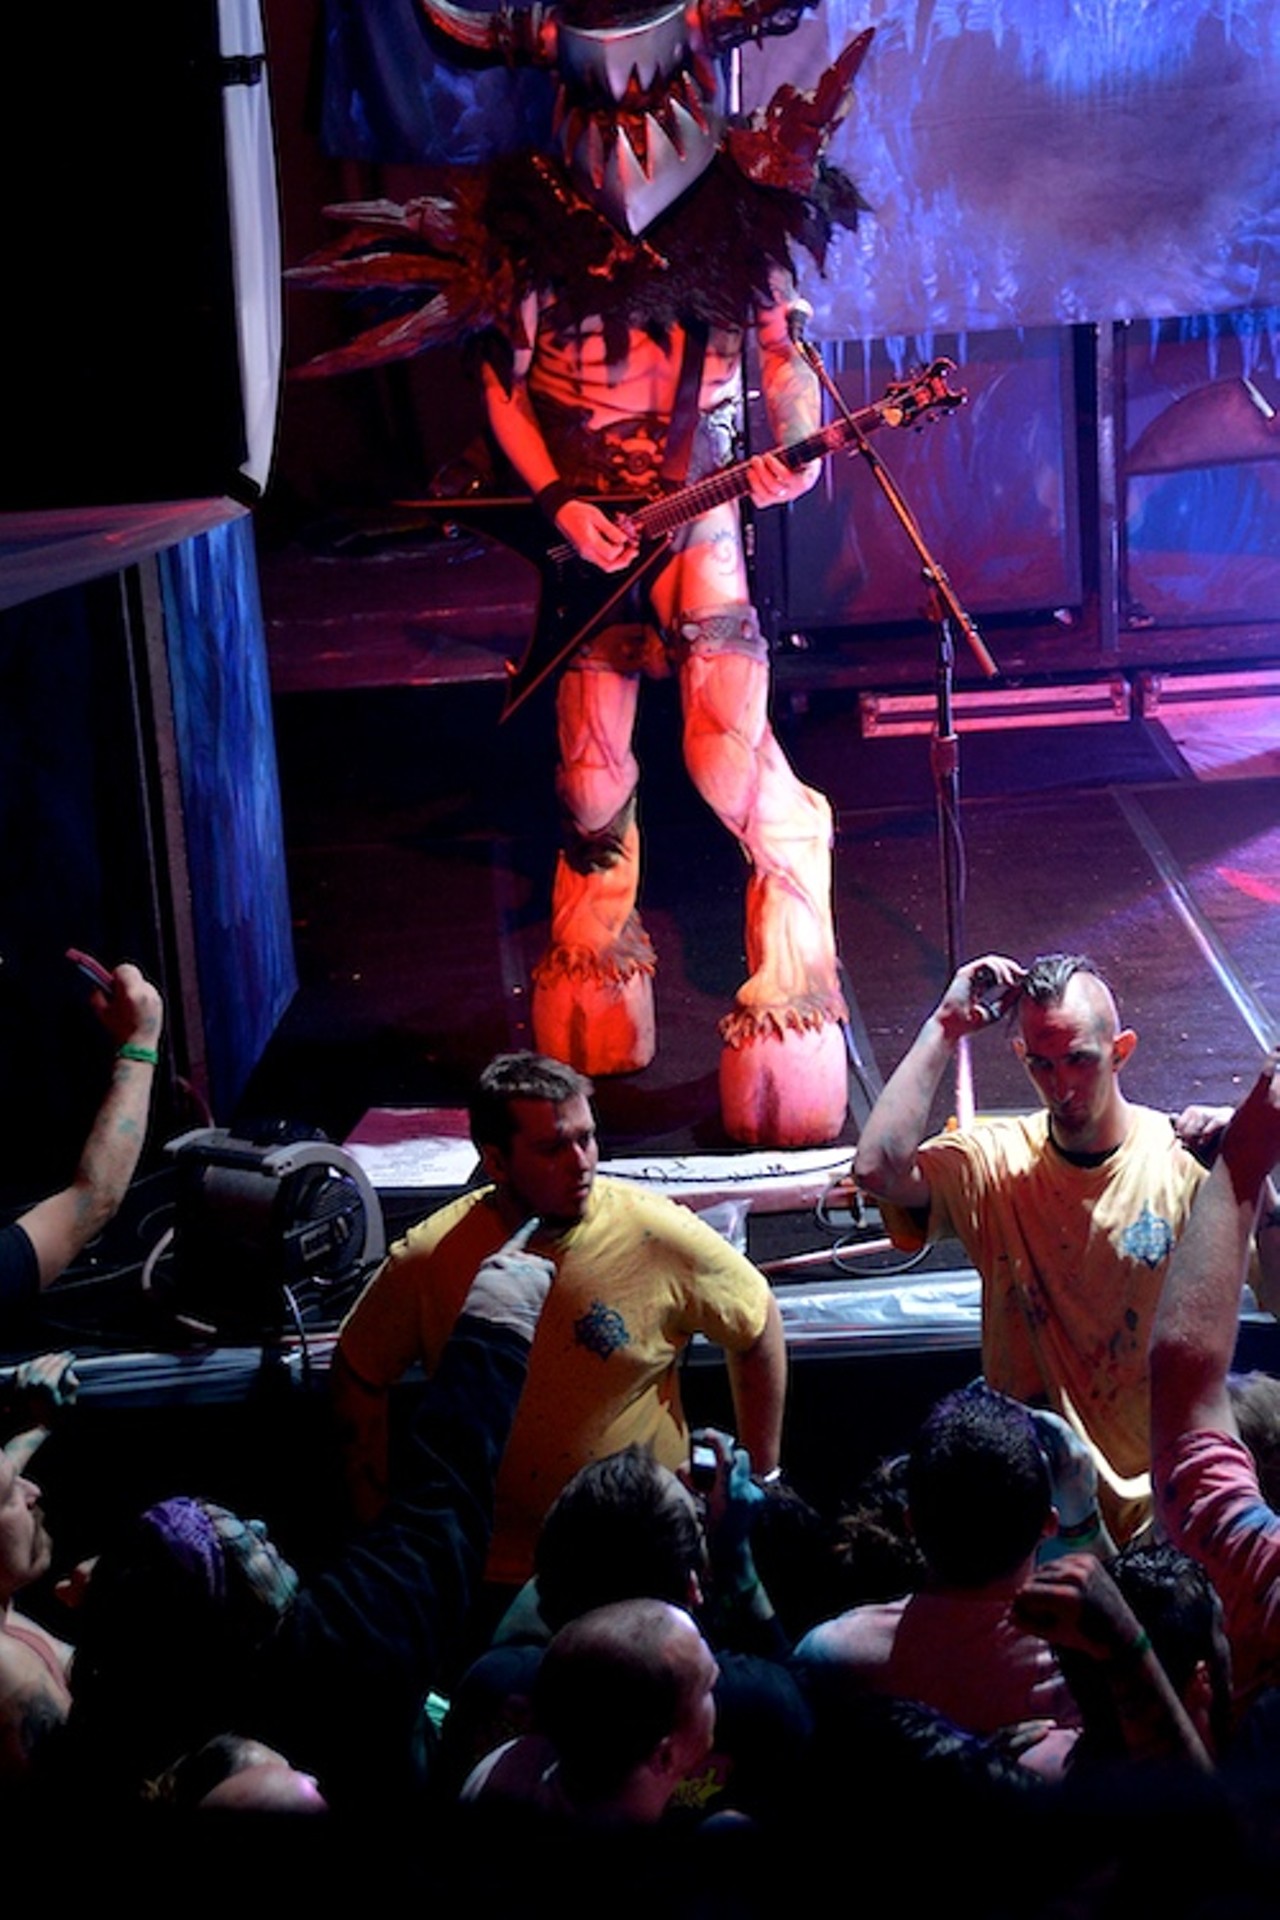 16 Photos from the Gwar concert at House of Blues